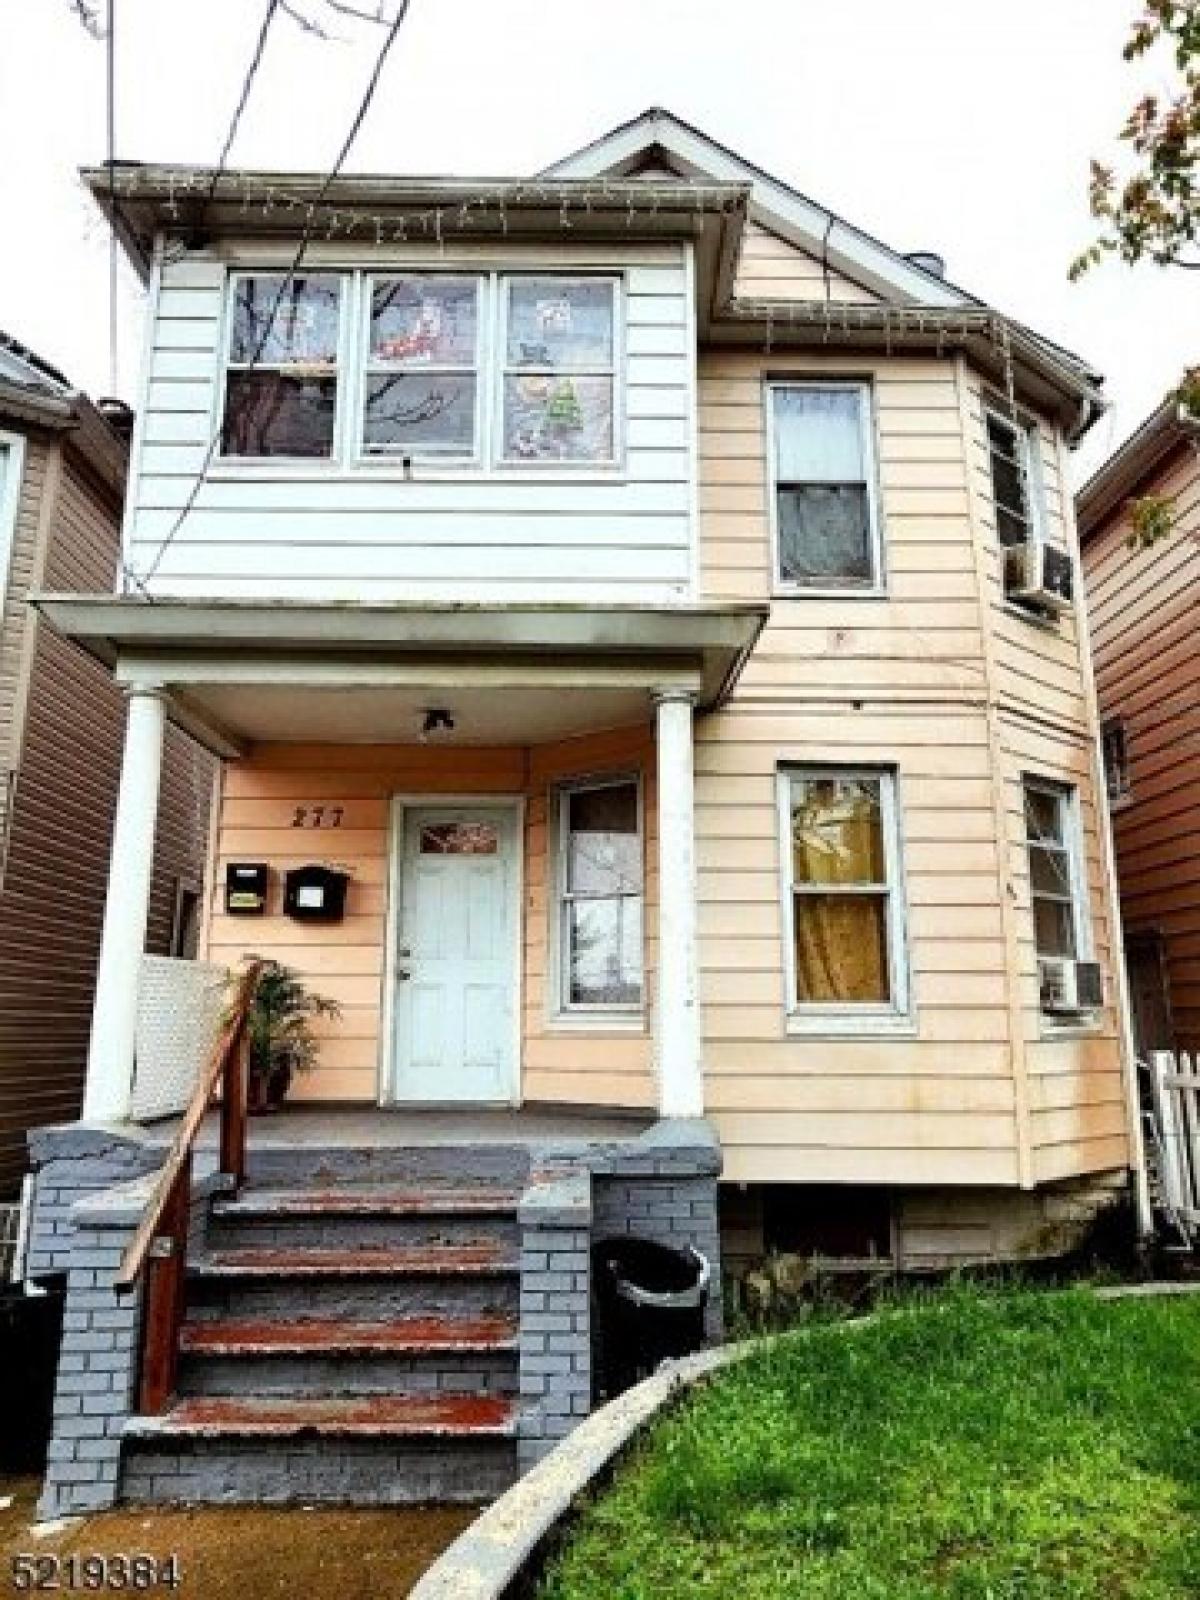 Picture of Home For Sale in Passaic, New Jersey, United States